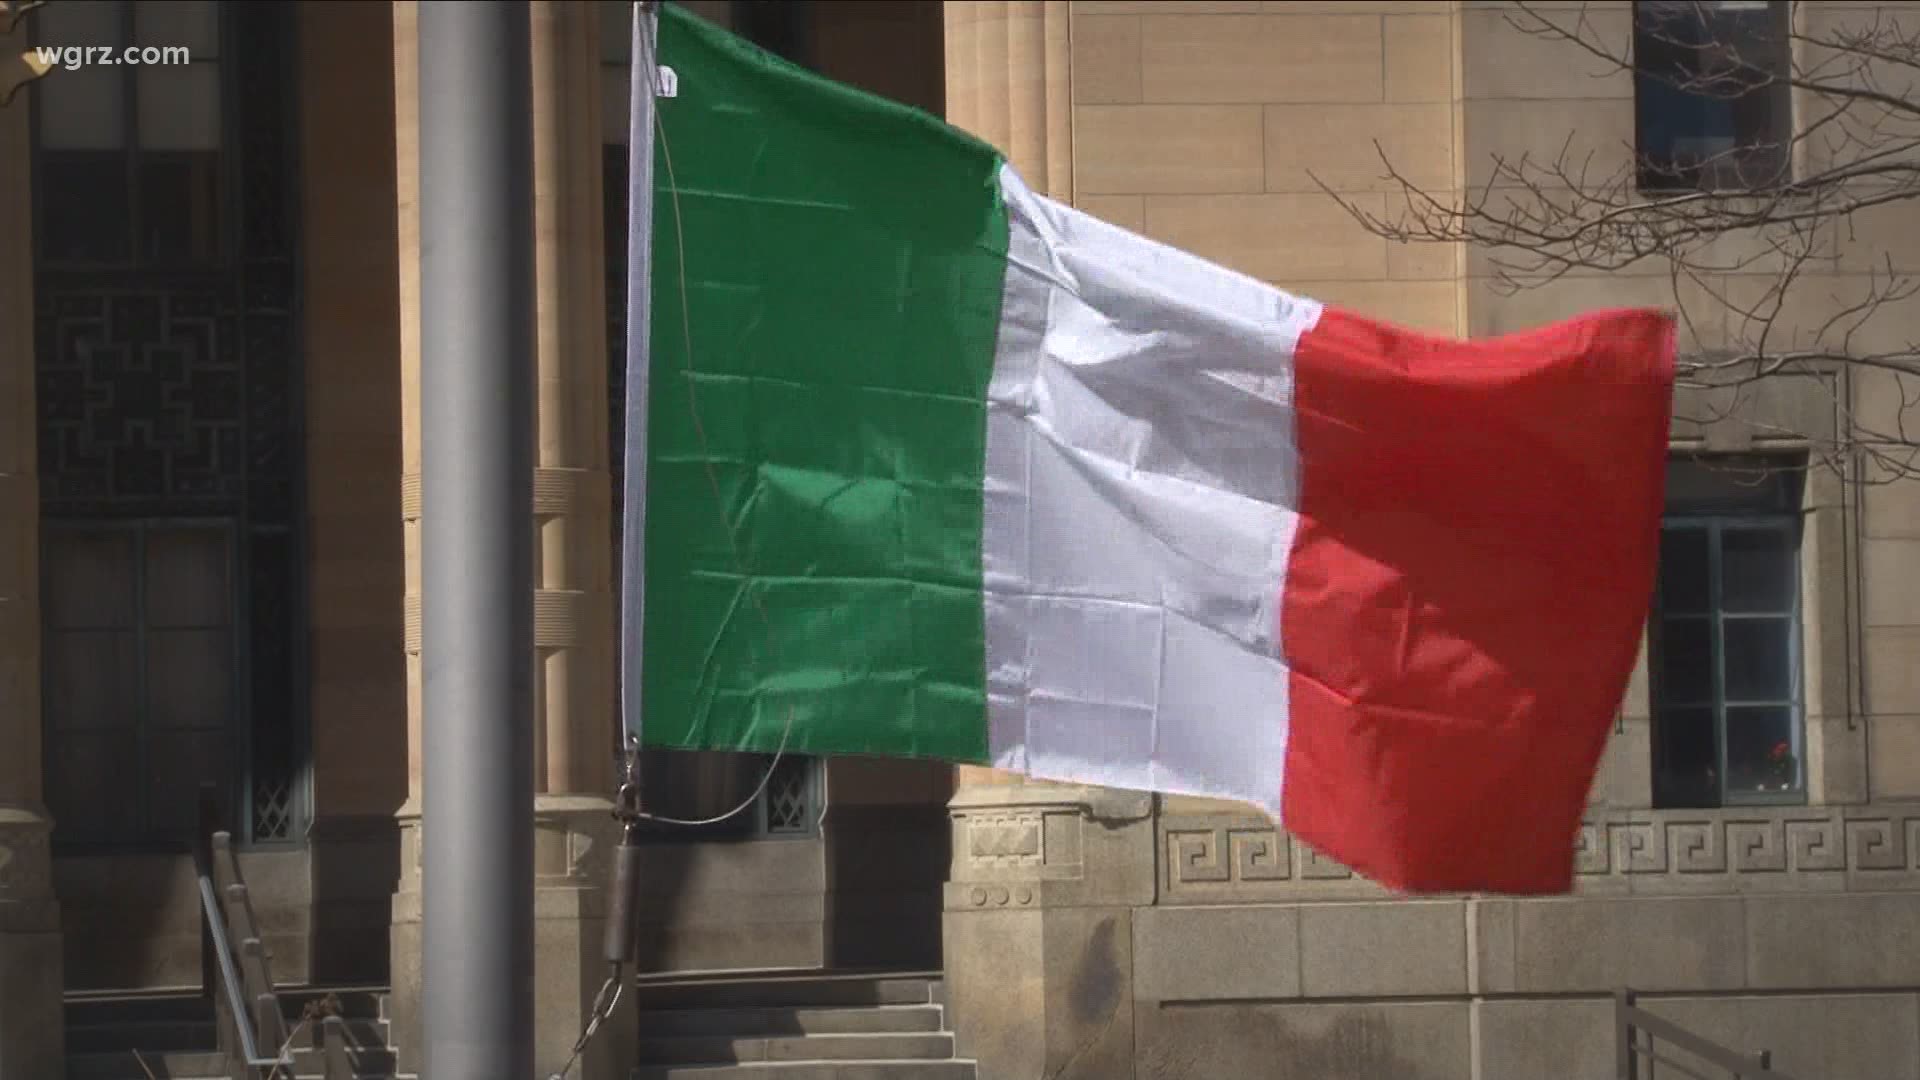 Buffalo's annual St. Patrick's Day parade was canceled this year but that didn't stop the city from marking the holiday with an Irish flag raising today.